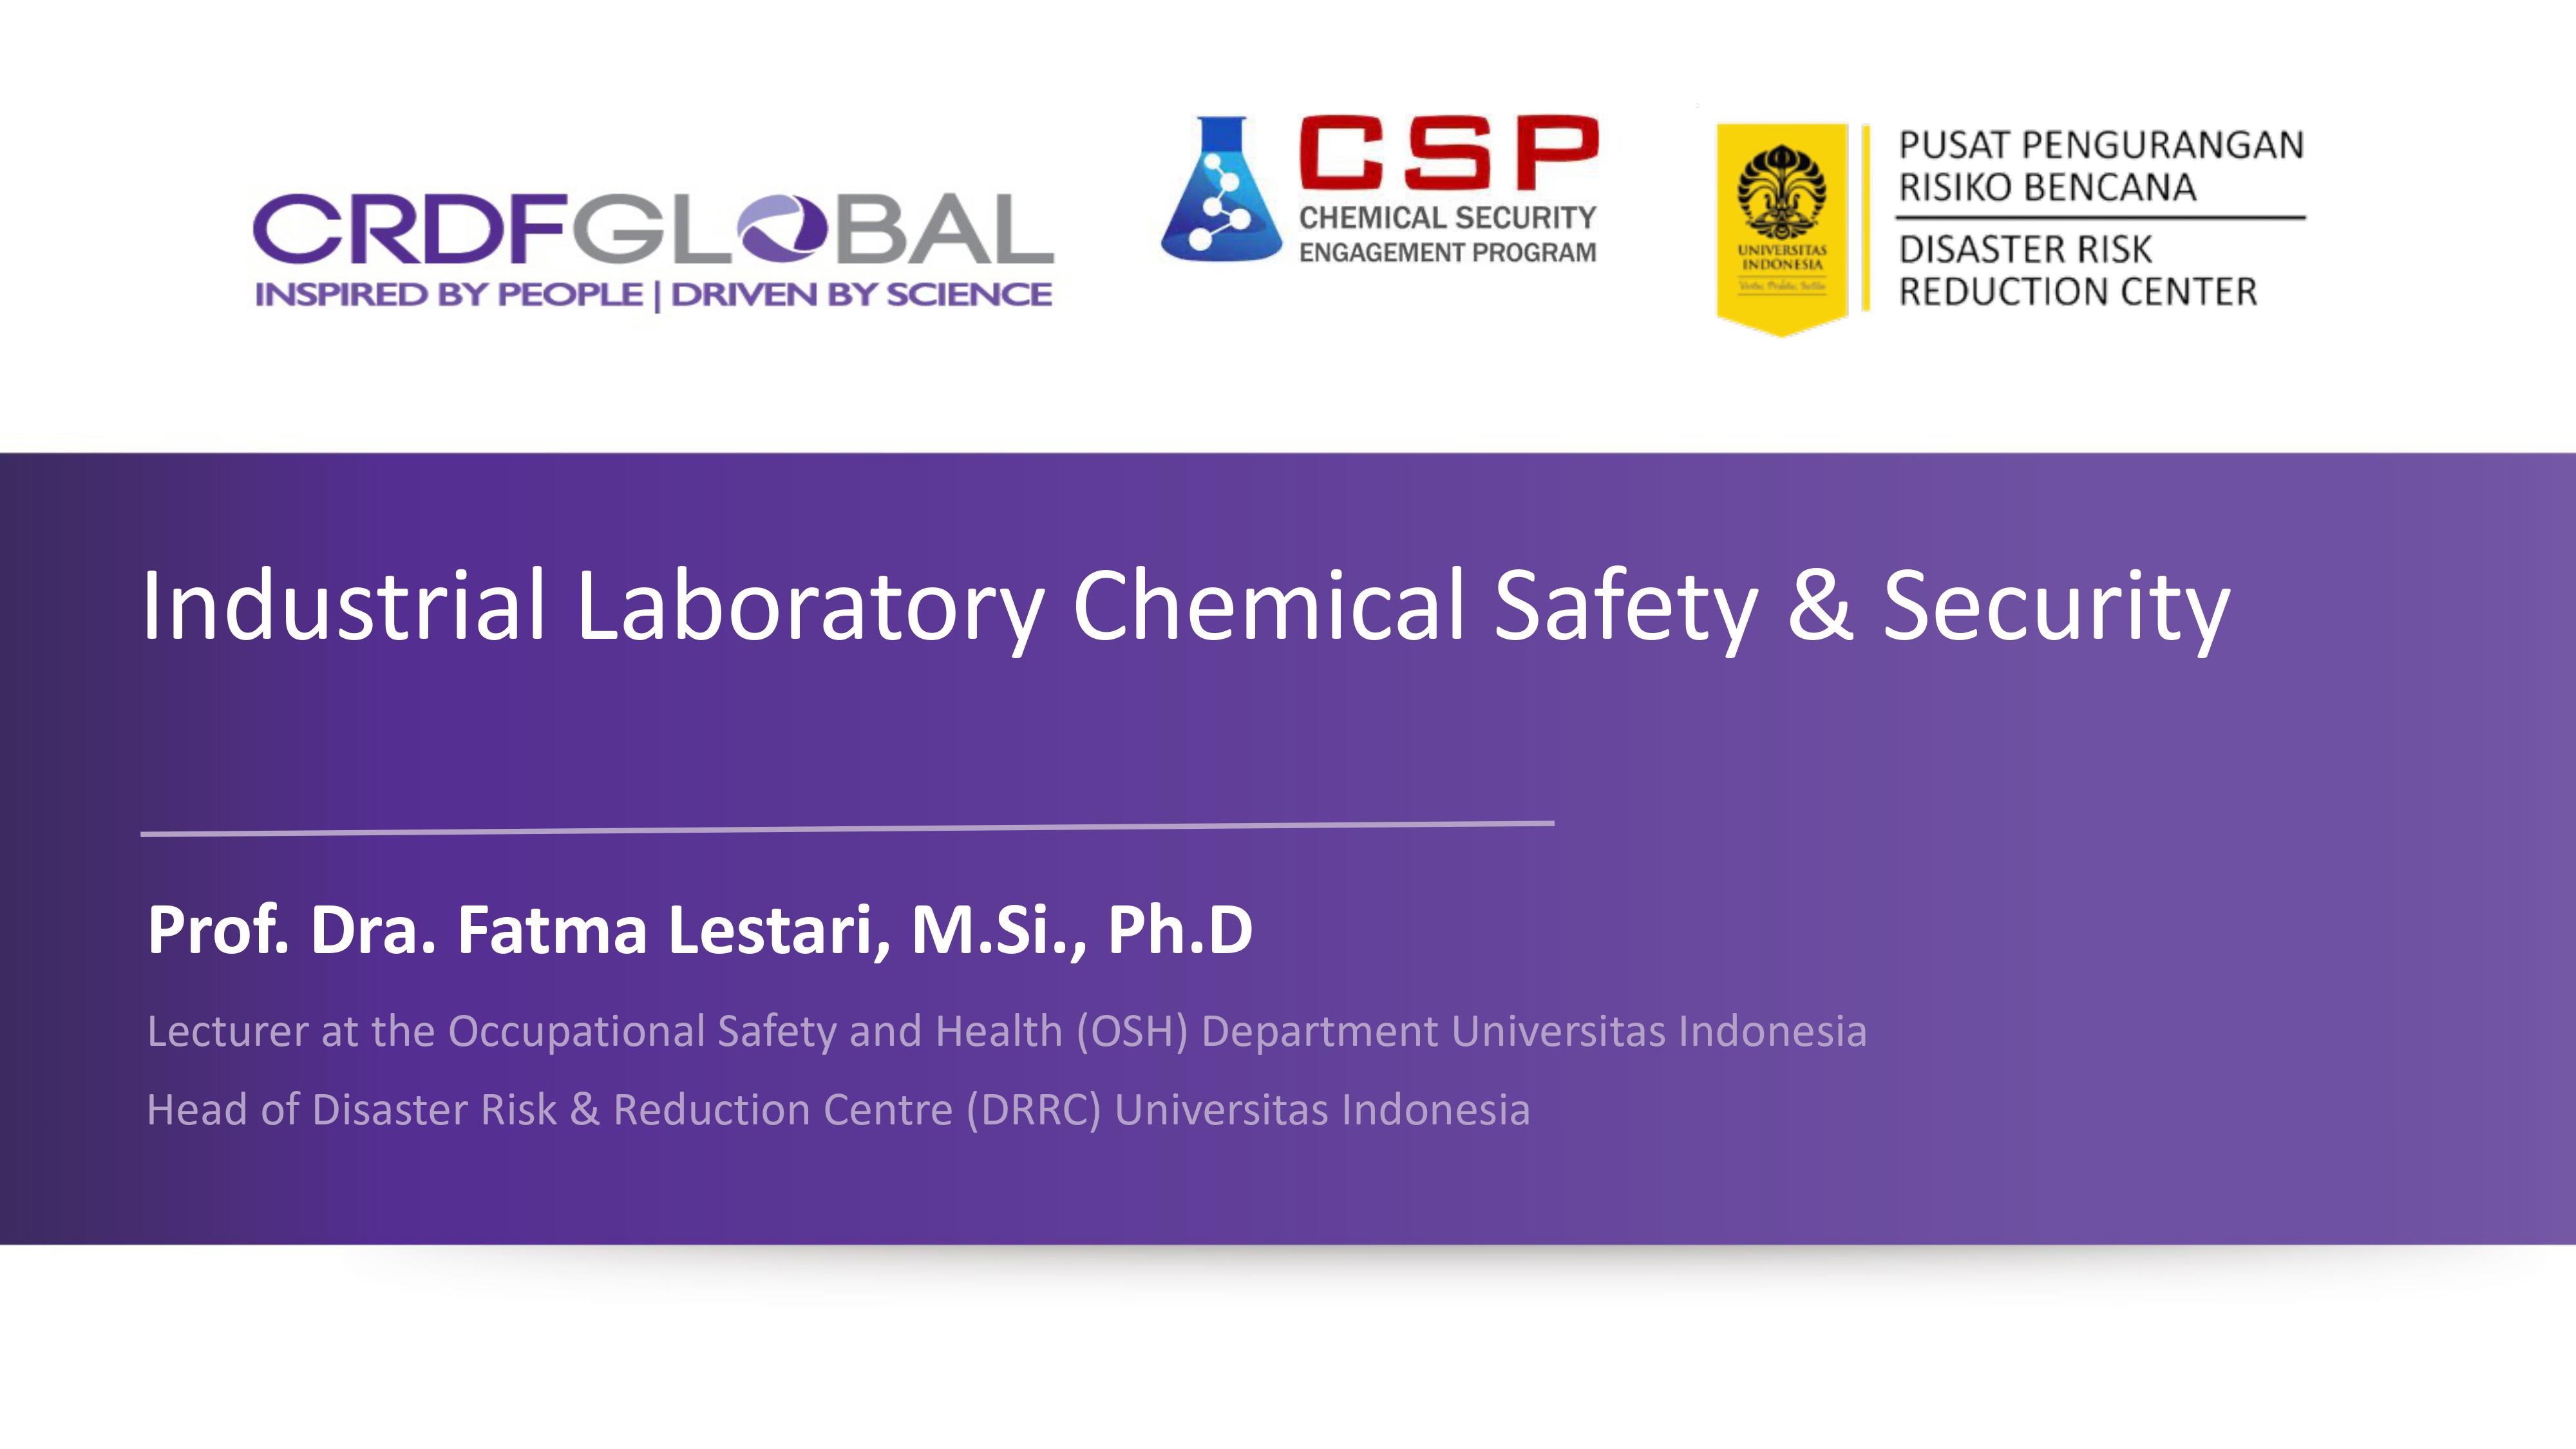 Industrial Laboratory and Chemical Safety